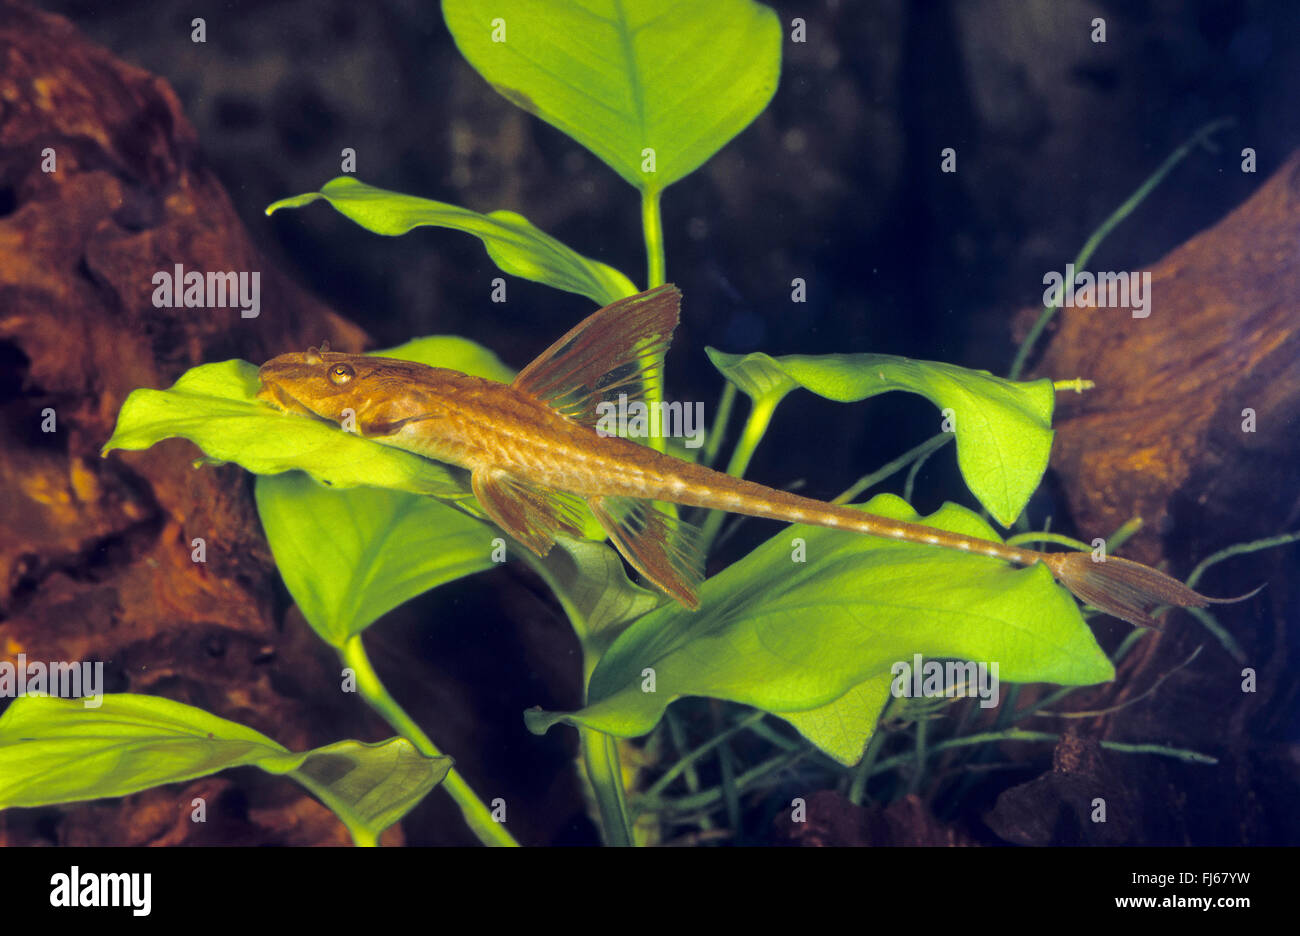 Whiptail catfish, Red Lizard Catfish (Rineloricaria spec.), rests on the leaf of a water plant Stock Photo